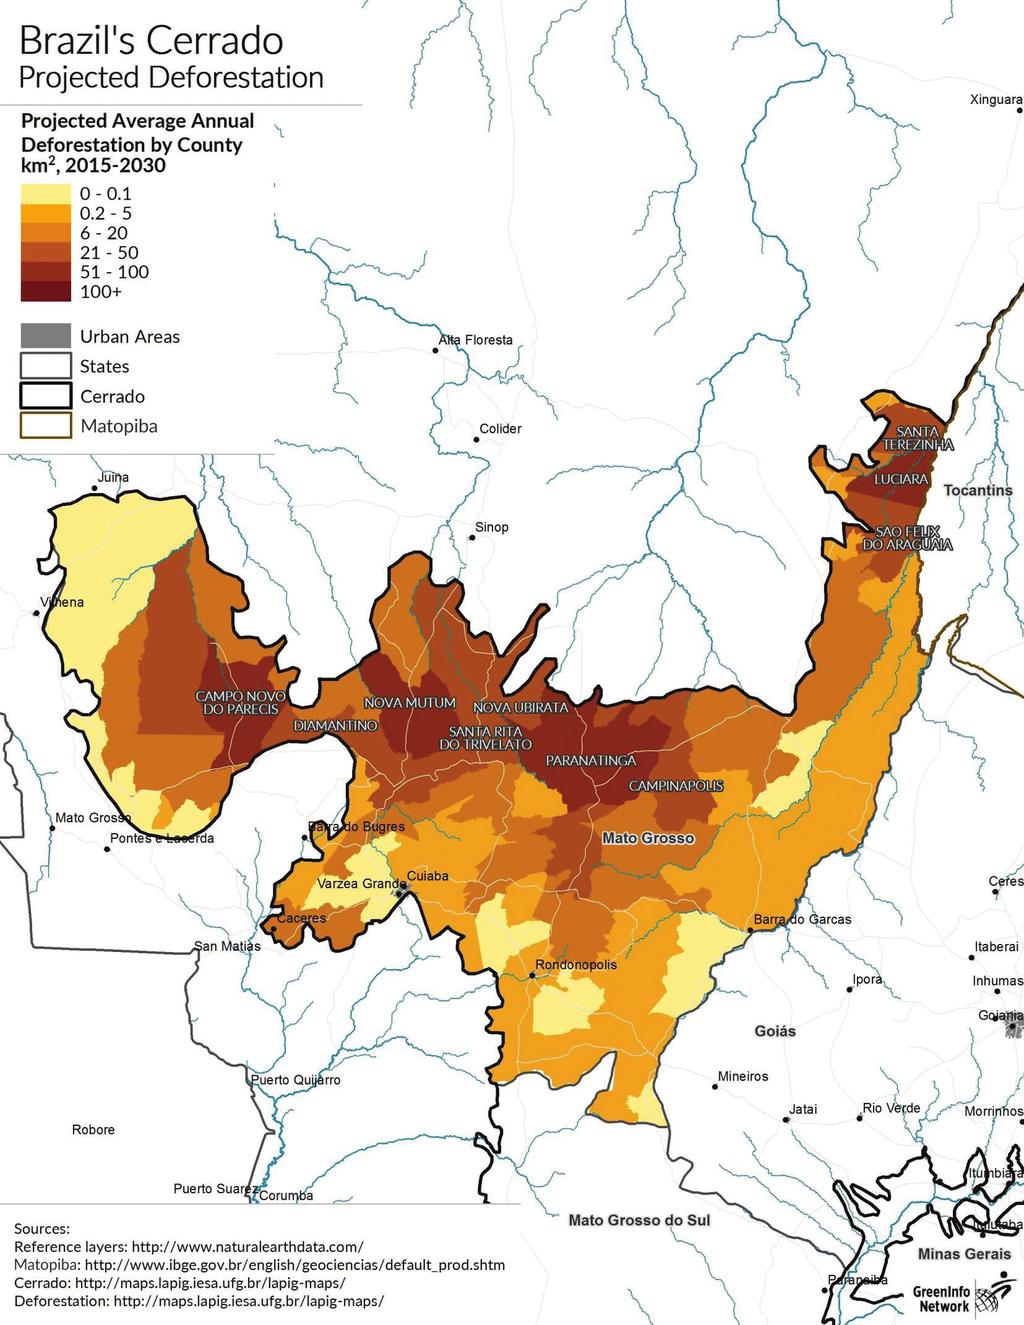 21 Mato Grosso Continued high deforestation is a risk across much of northern